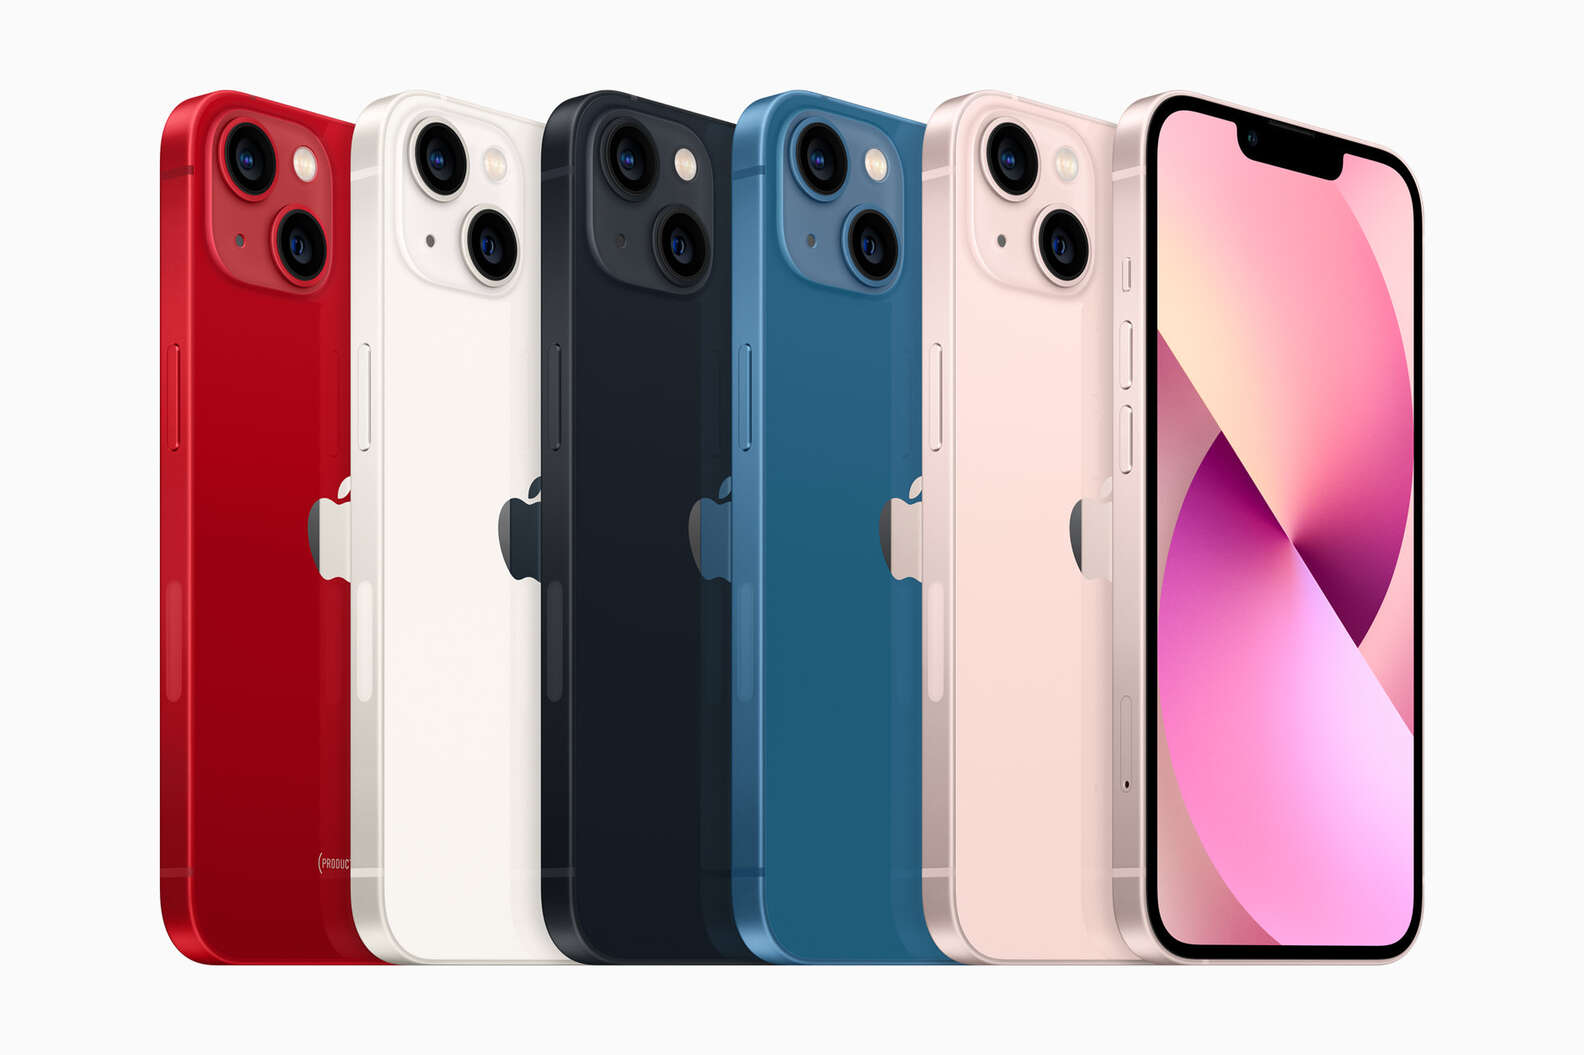 Apple iPhone 13 Lineup: New Features, Colors, Sizes, Pricing & More